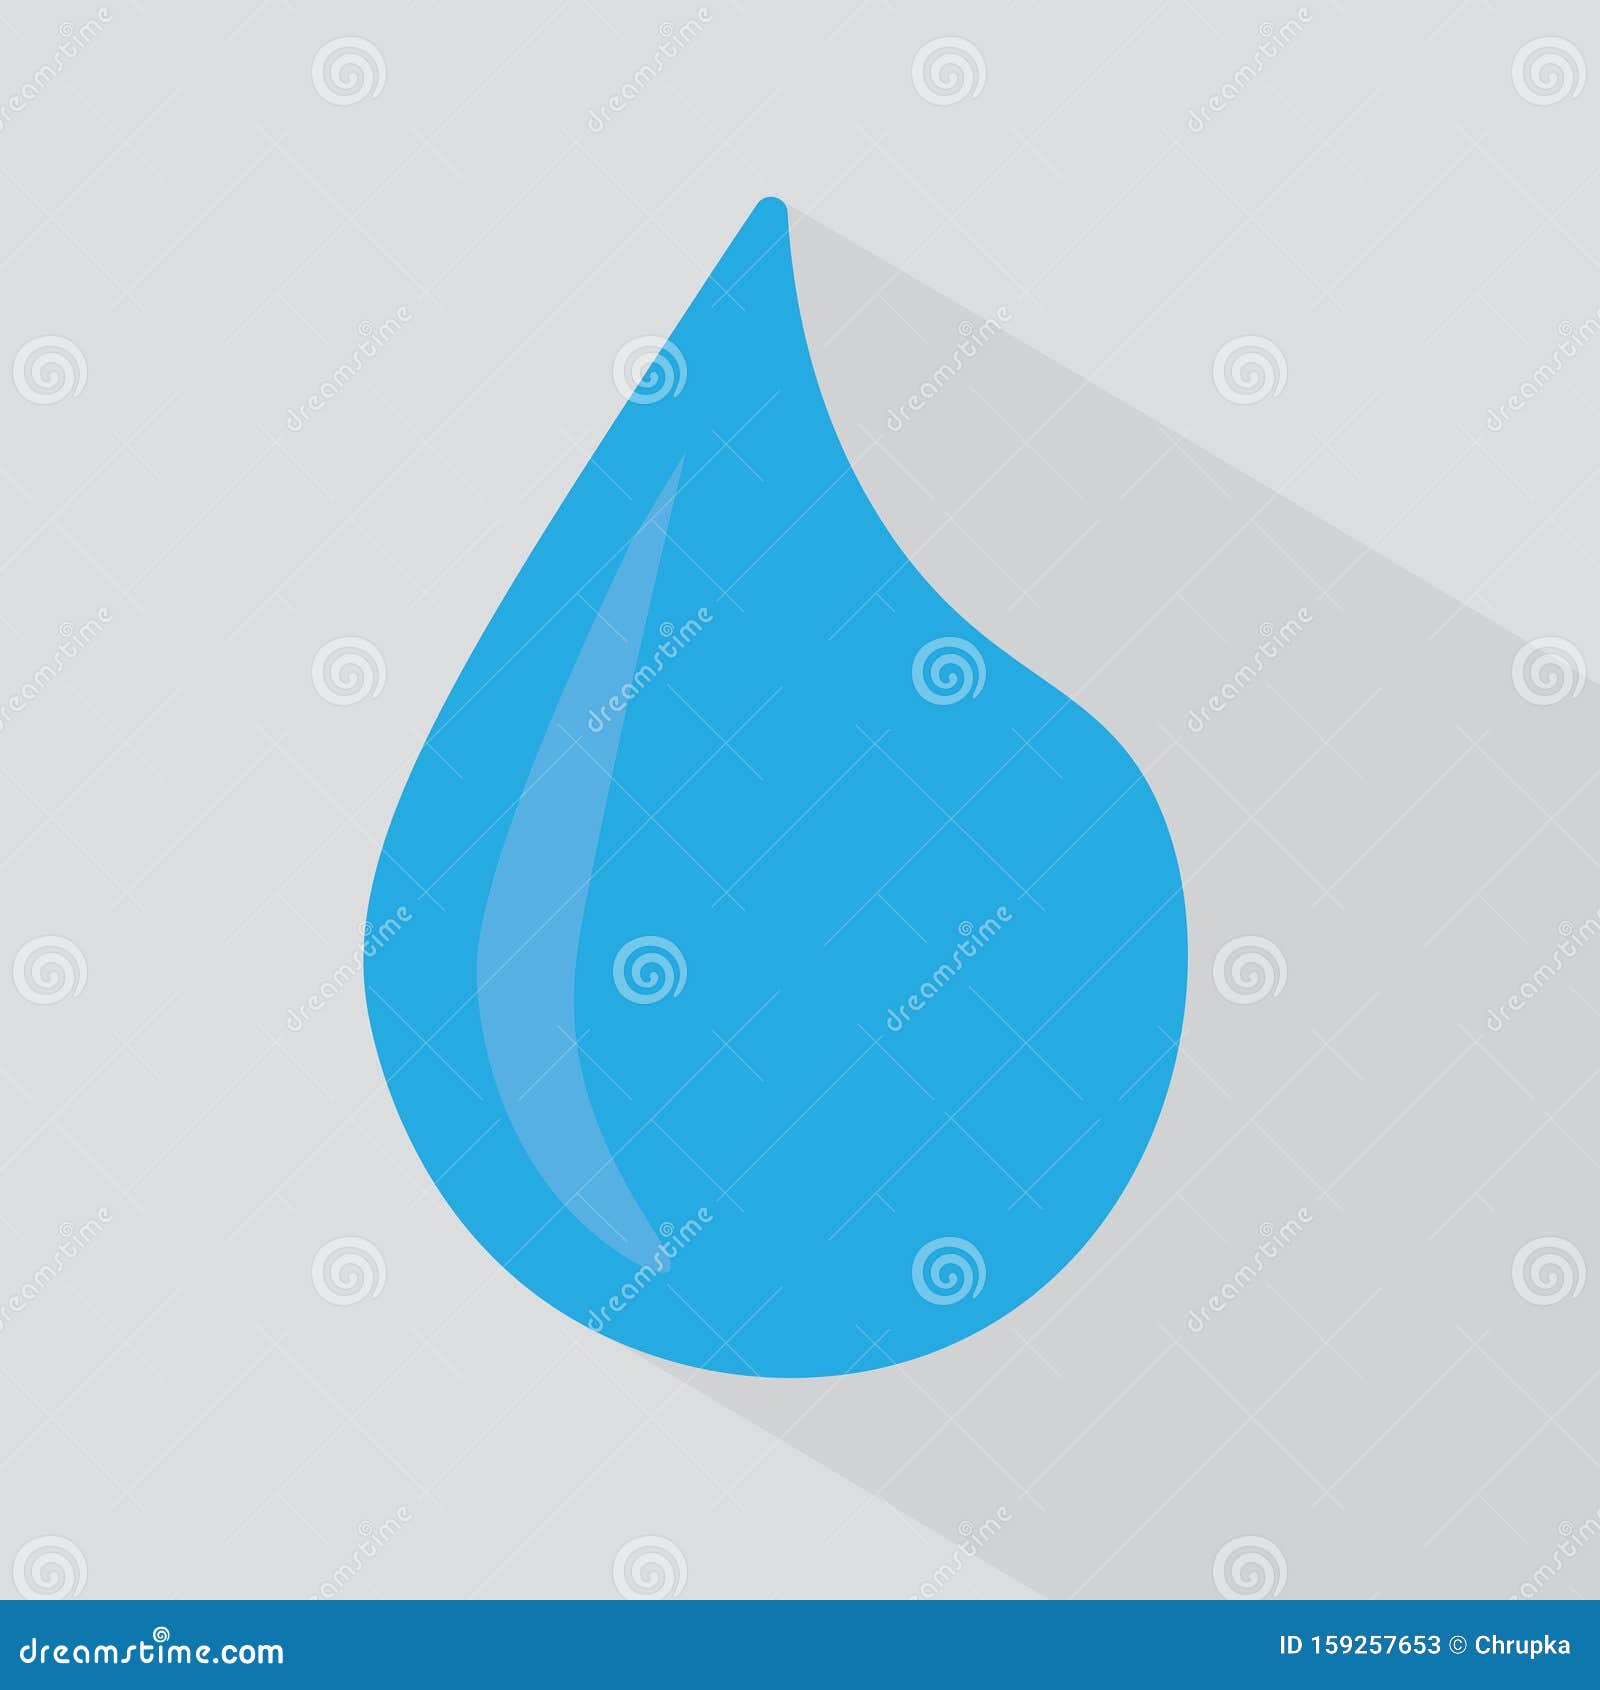 Tear or water drop icon stock vector. Illustration of fitness - 159257653